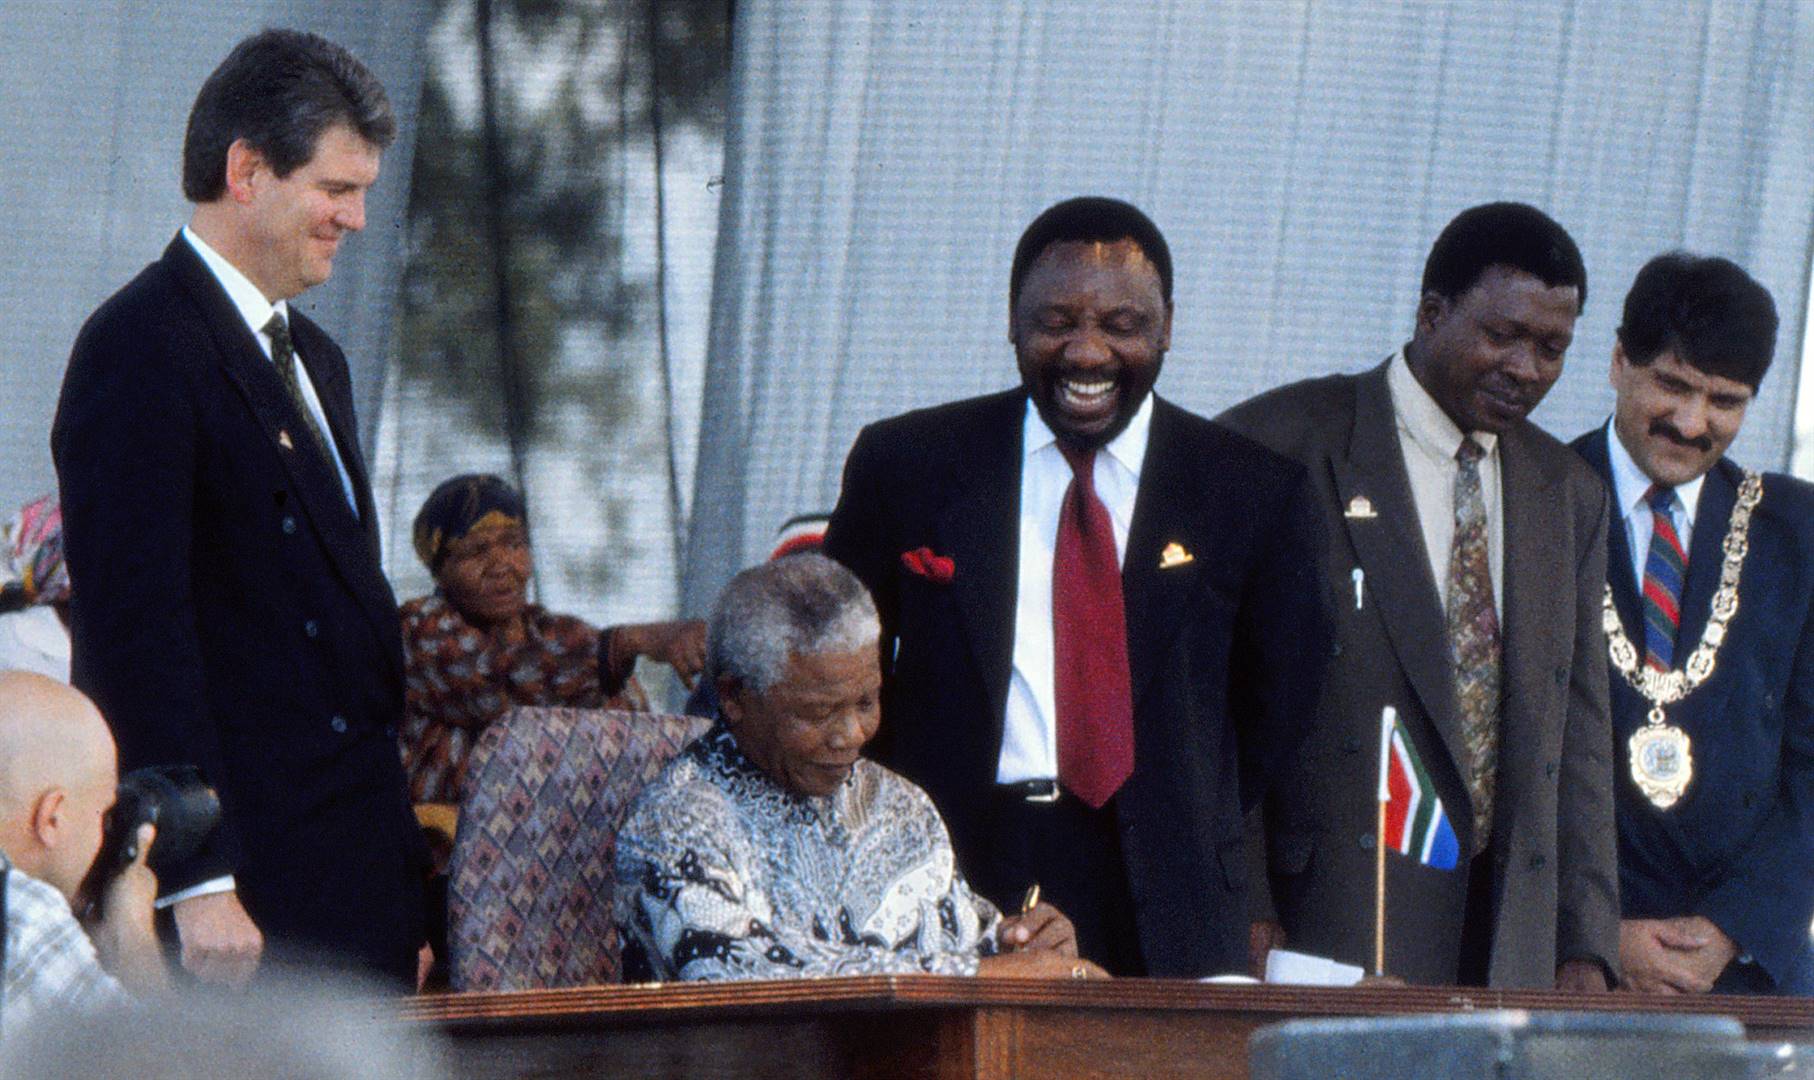 Nelson Mandela and Cyril Ramaphosa during the signing of the constitution 15 years ago (Adopting the constitution) Picture: Media24